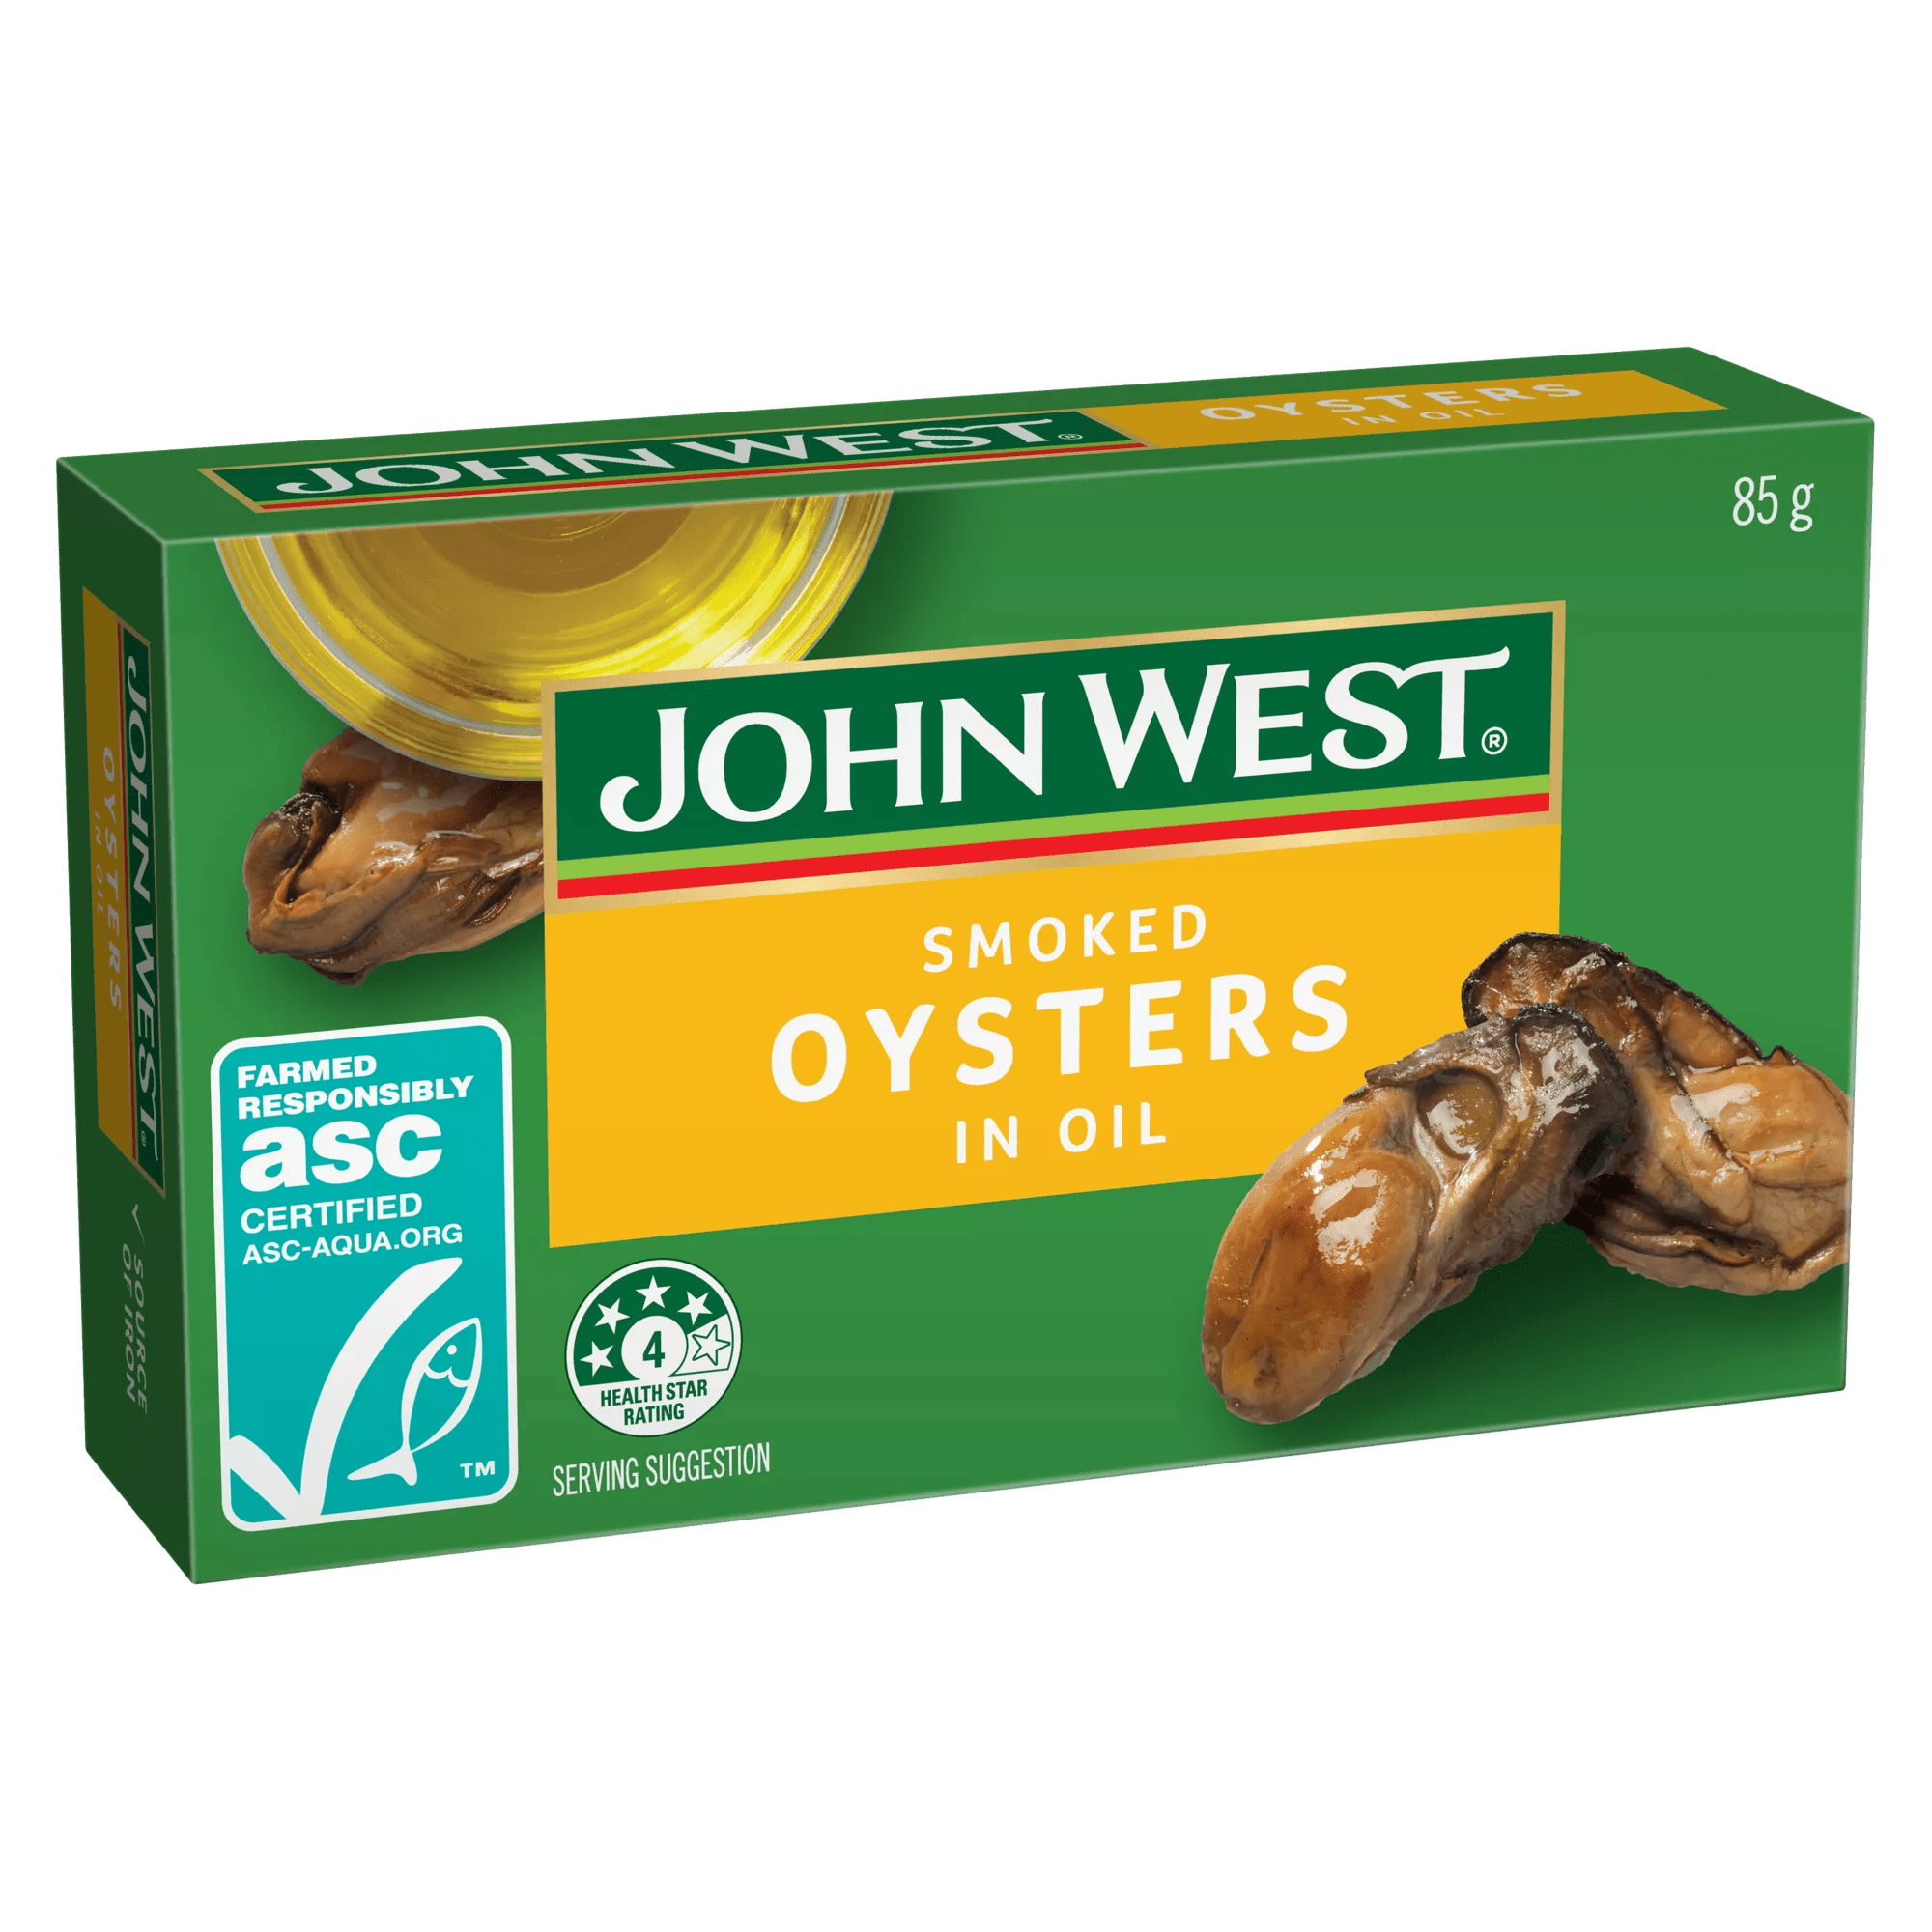 John West Smoked Oysters in Vegetable Oil 85g